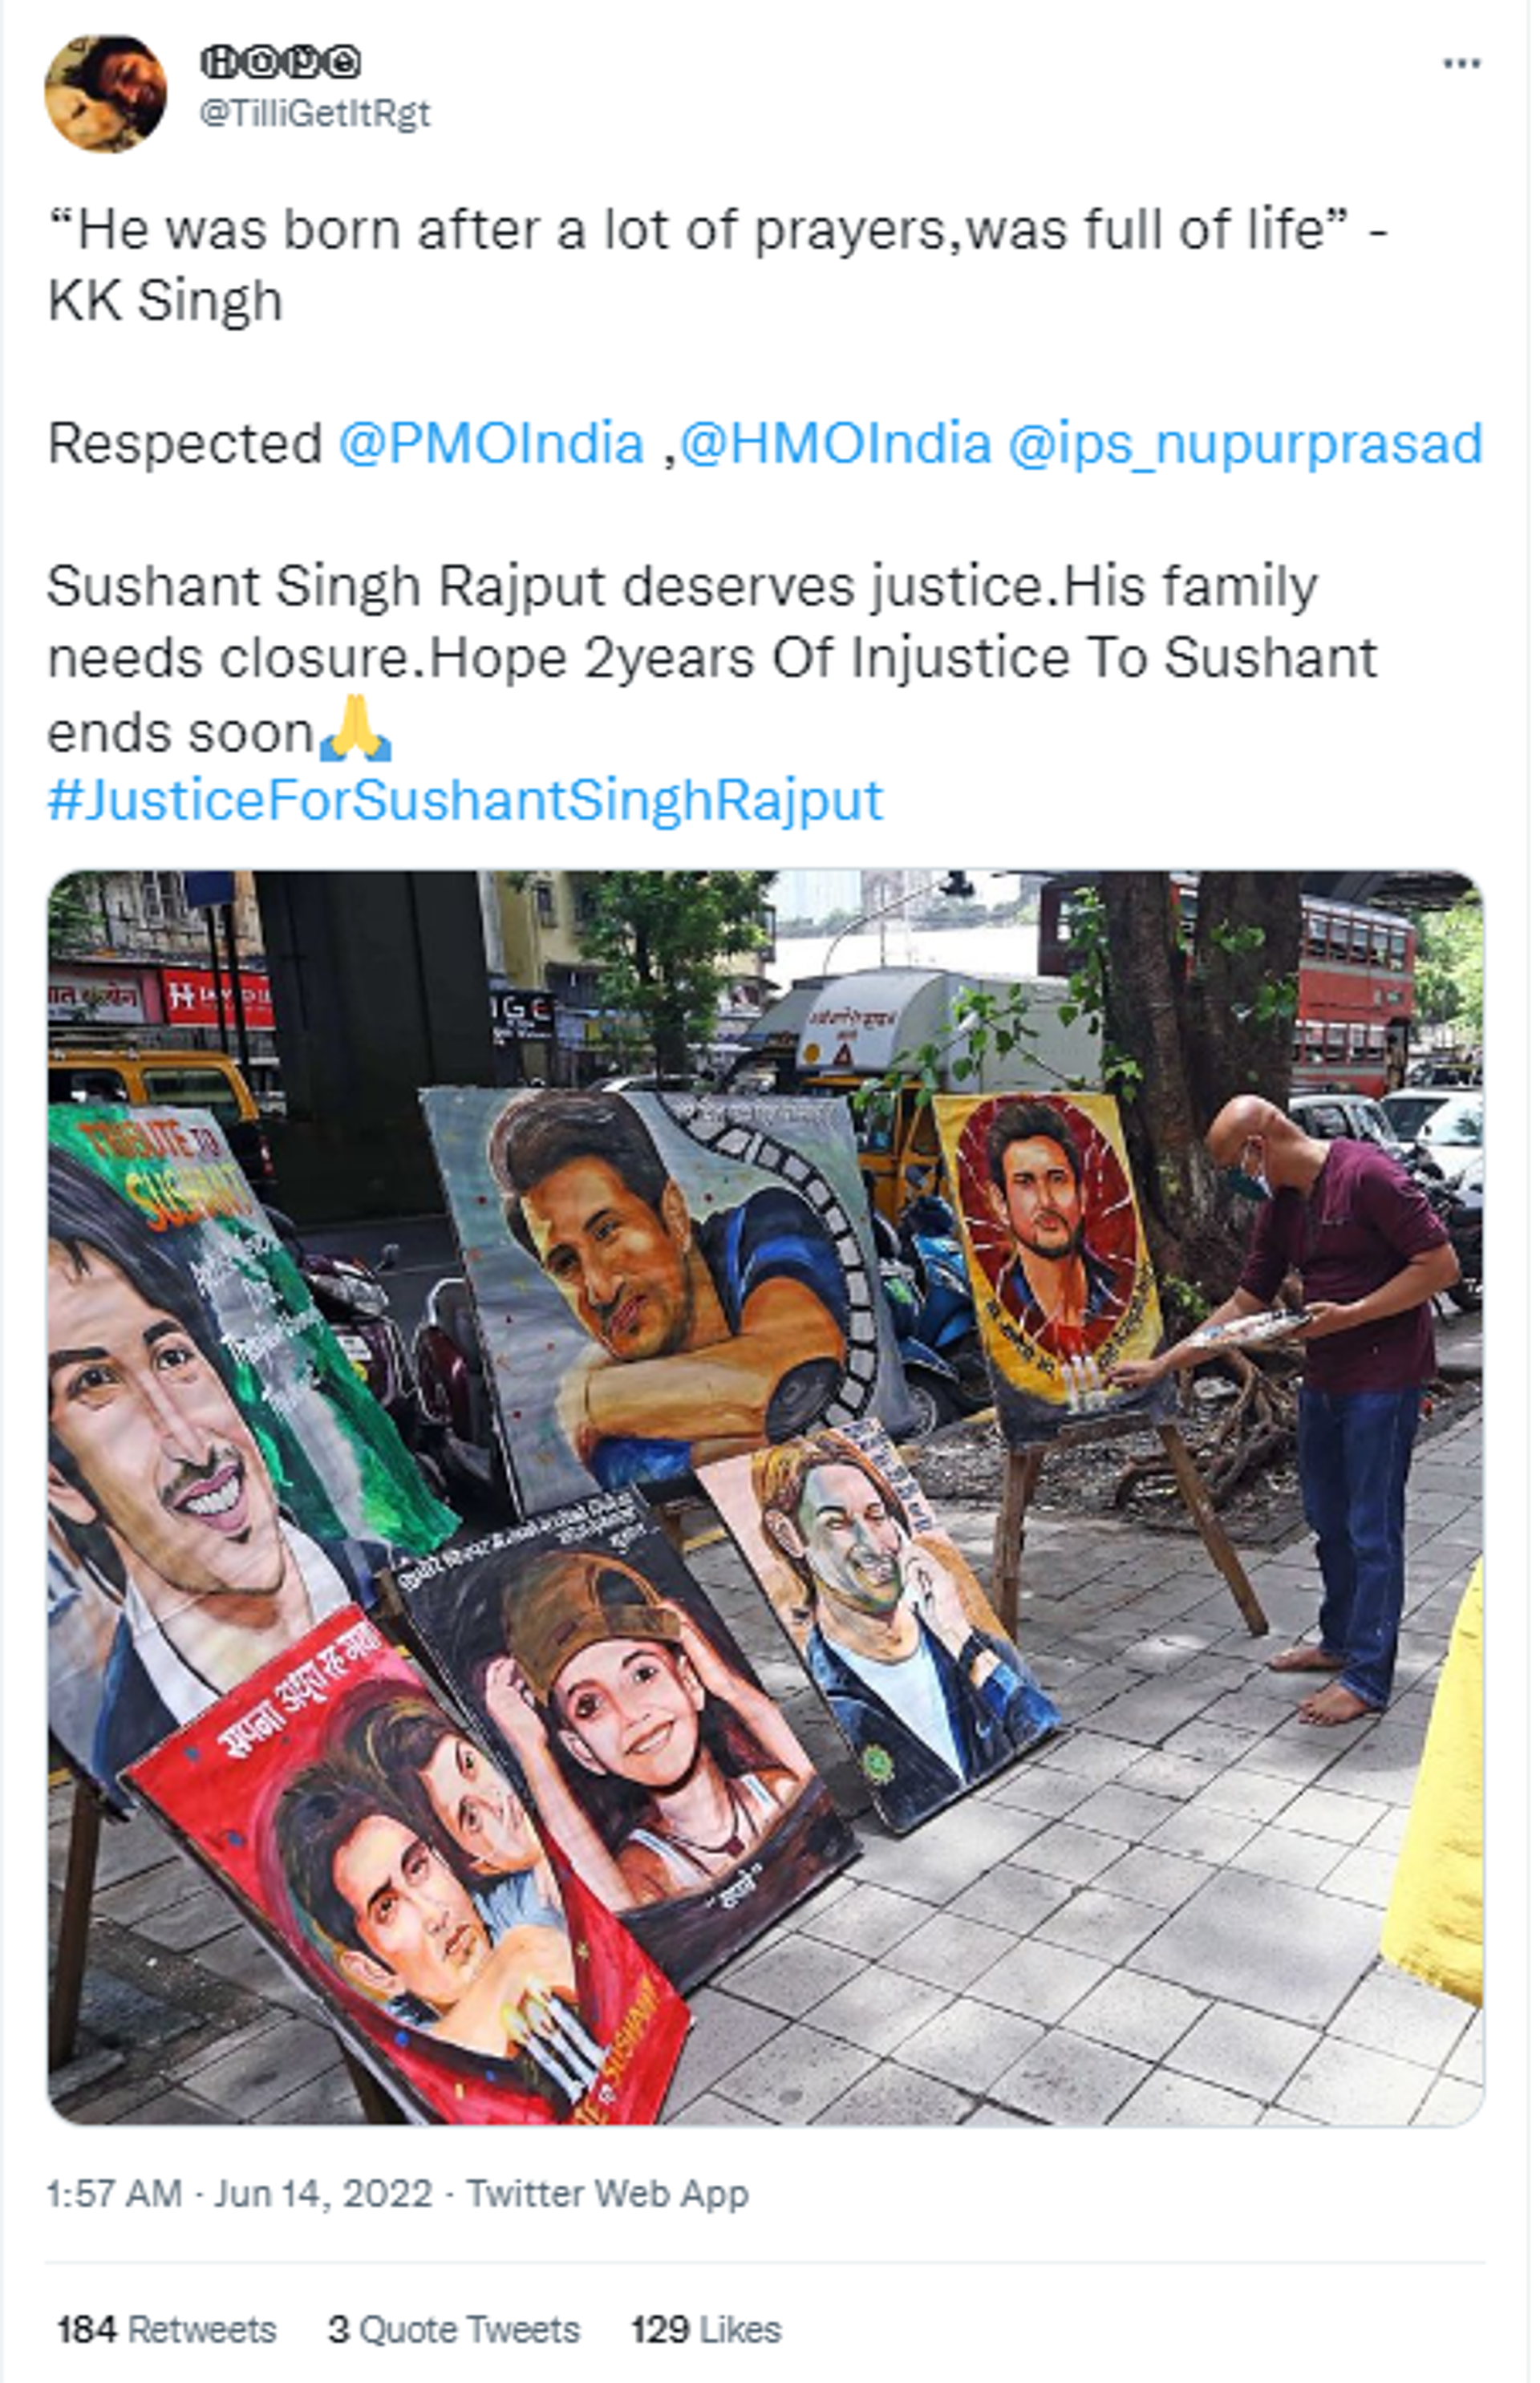 Fans Call For Justice, Pay Tribute To Late Bollywood Star Sushant Singh Rajput on his 2nd Death Anniversary  - Sputnik International, 1920, 14.06.2022